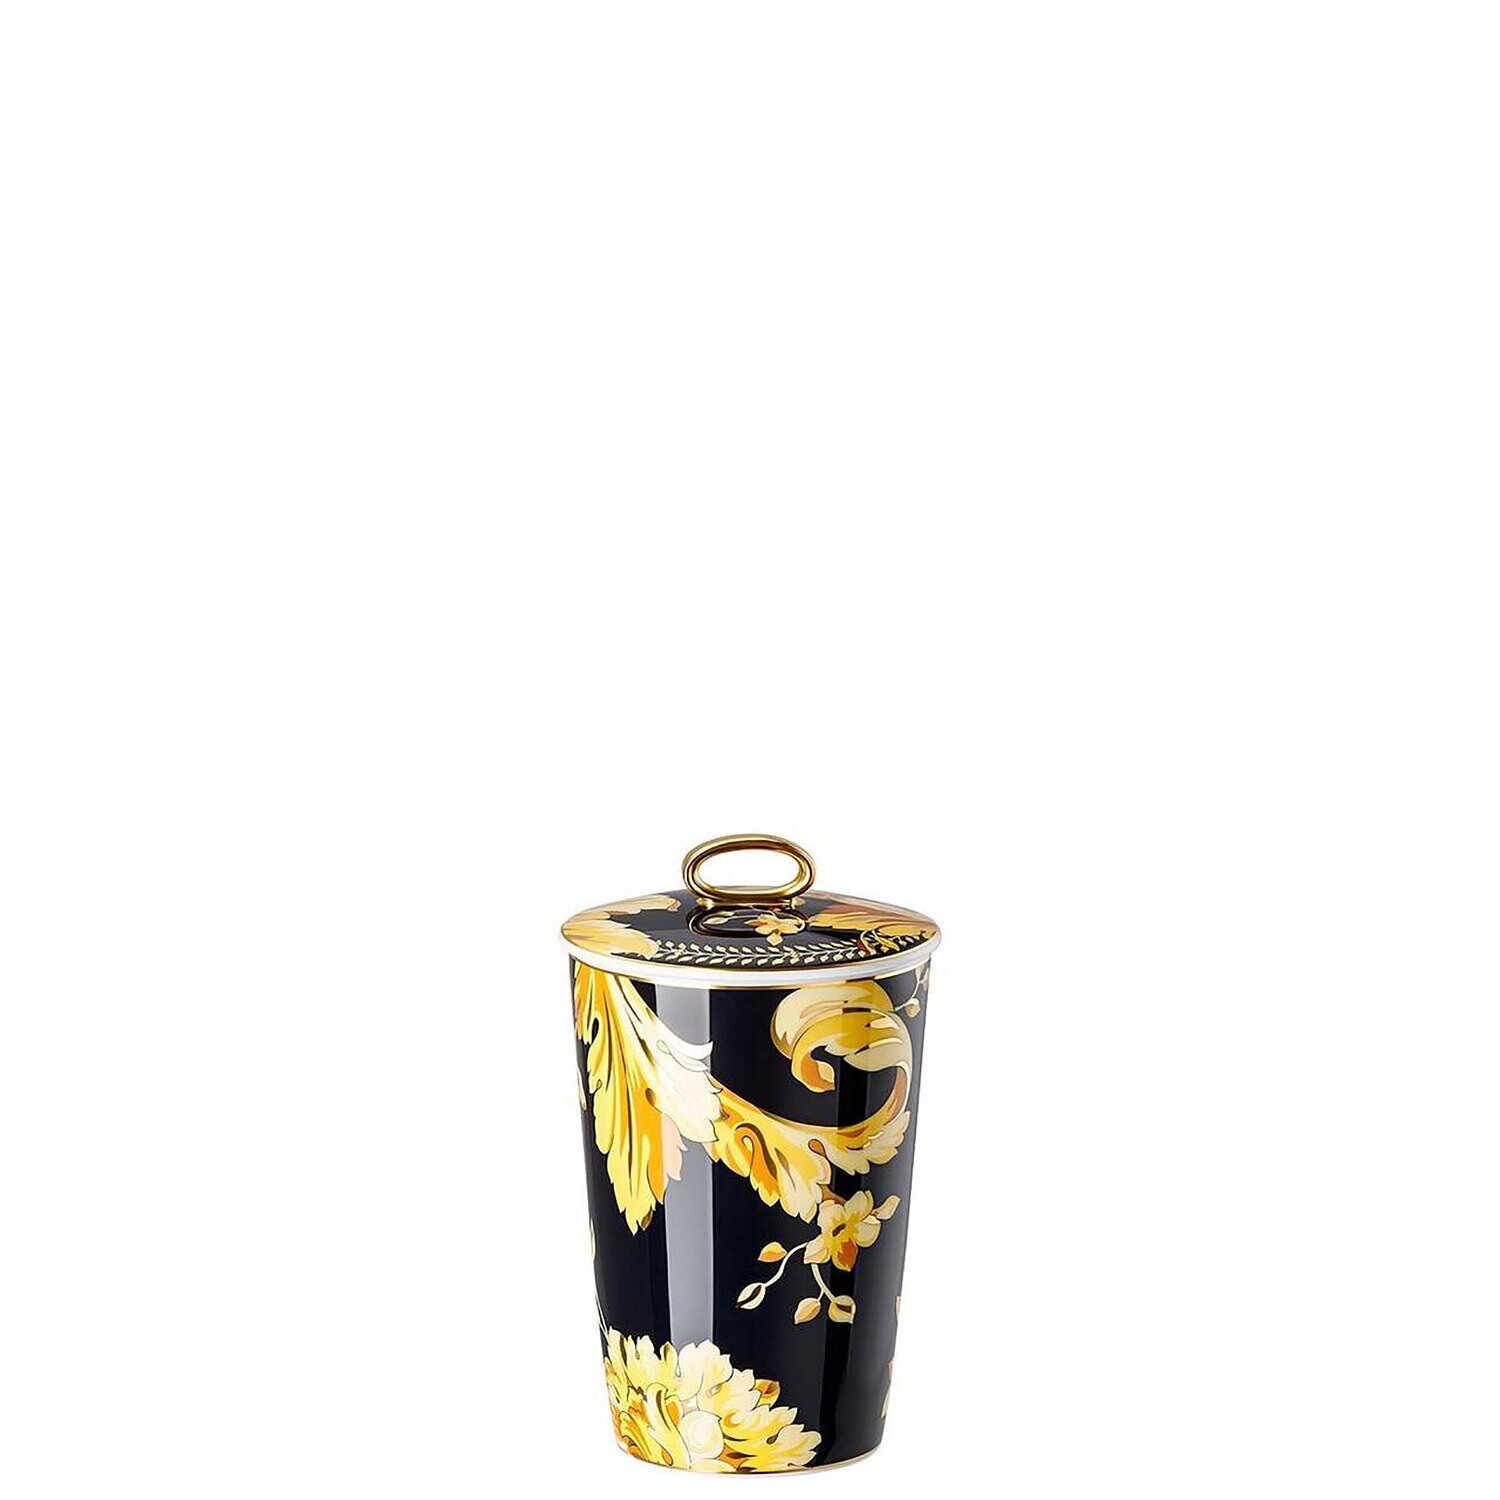 Versace Vanity Scented Votive Candle with Lid 5 1/2 Inch